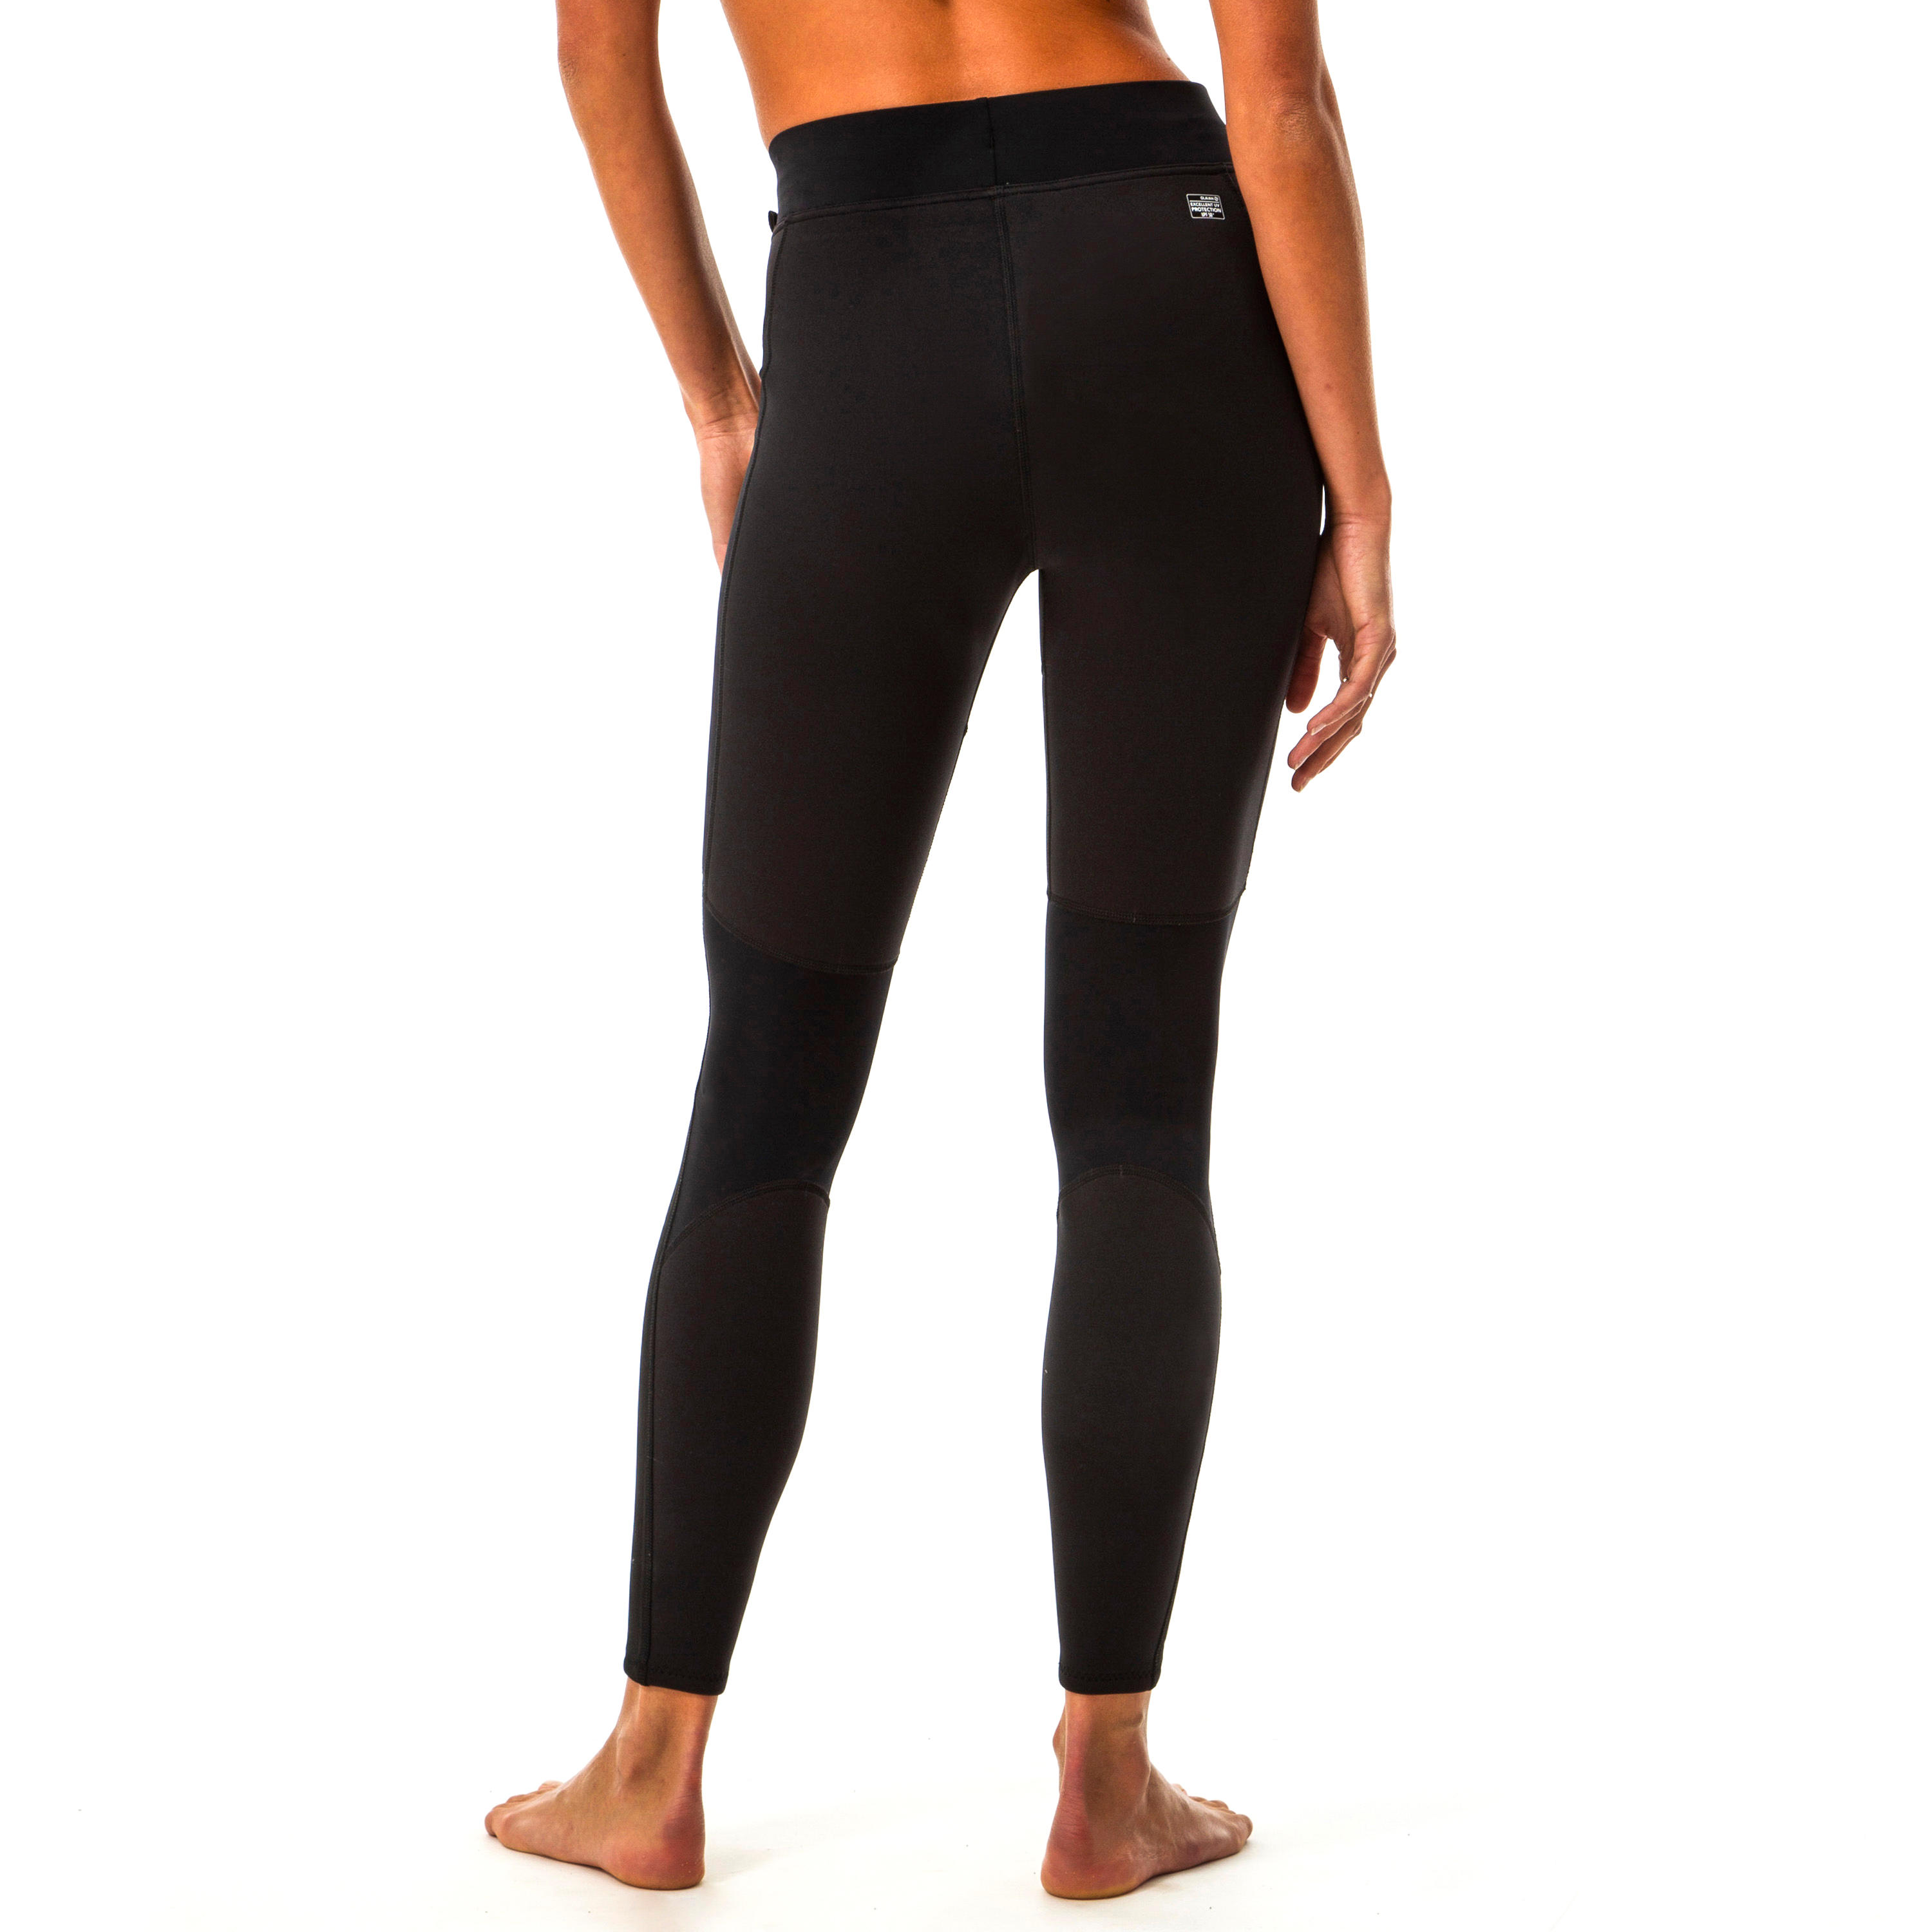 Olaian by Decathlon Solid Women Black Tights - Buy Olaian by